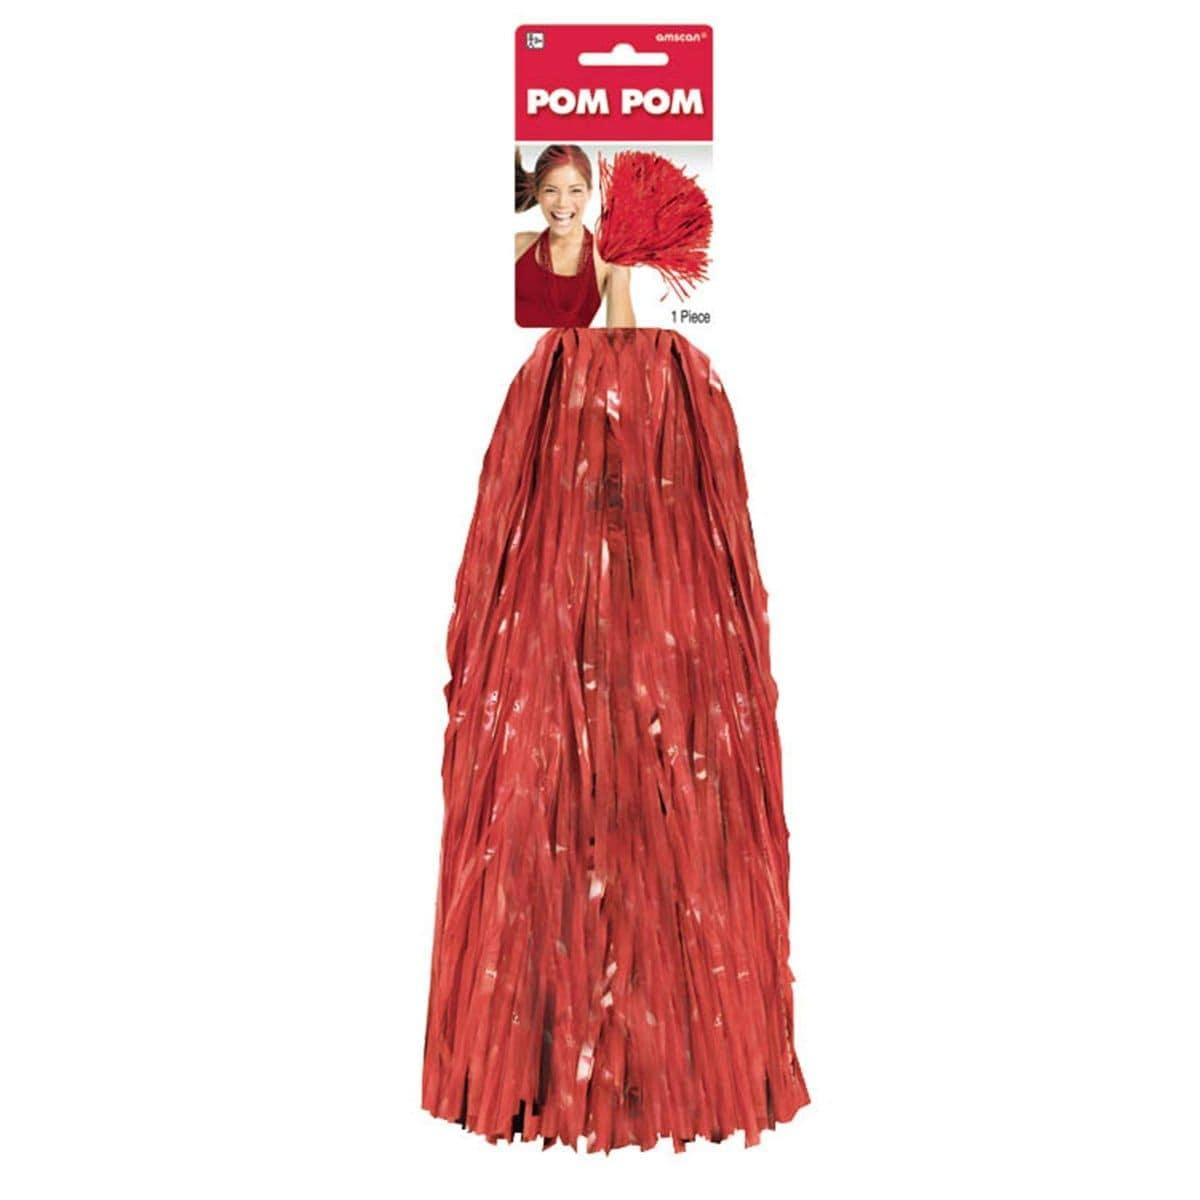 Buy Sports Theme Pom Pom - Red sold at Party Expert